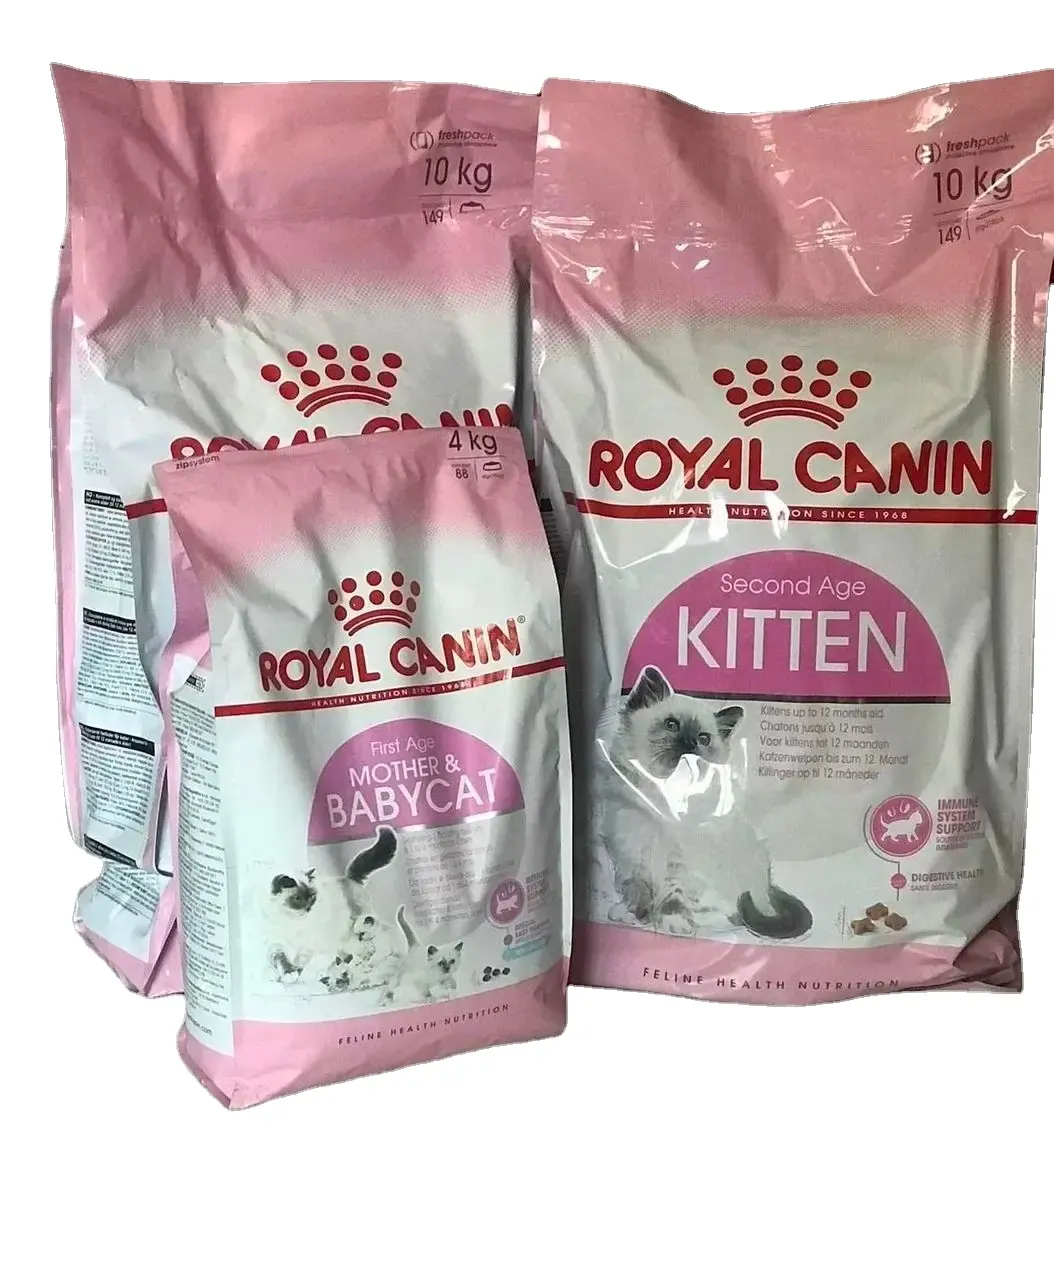 Best Quality Royal Canin Dog And Cat Food available. Wet and Dry Dog Food Exporters.